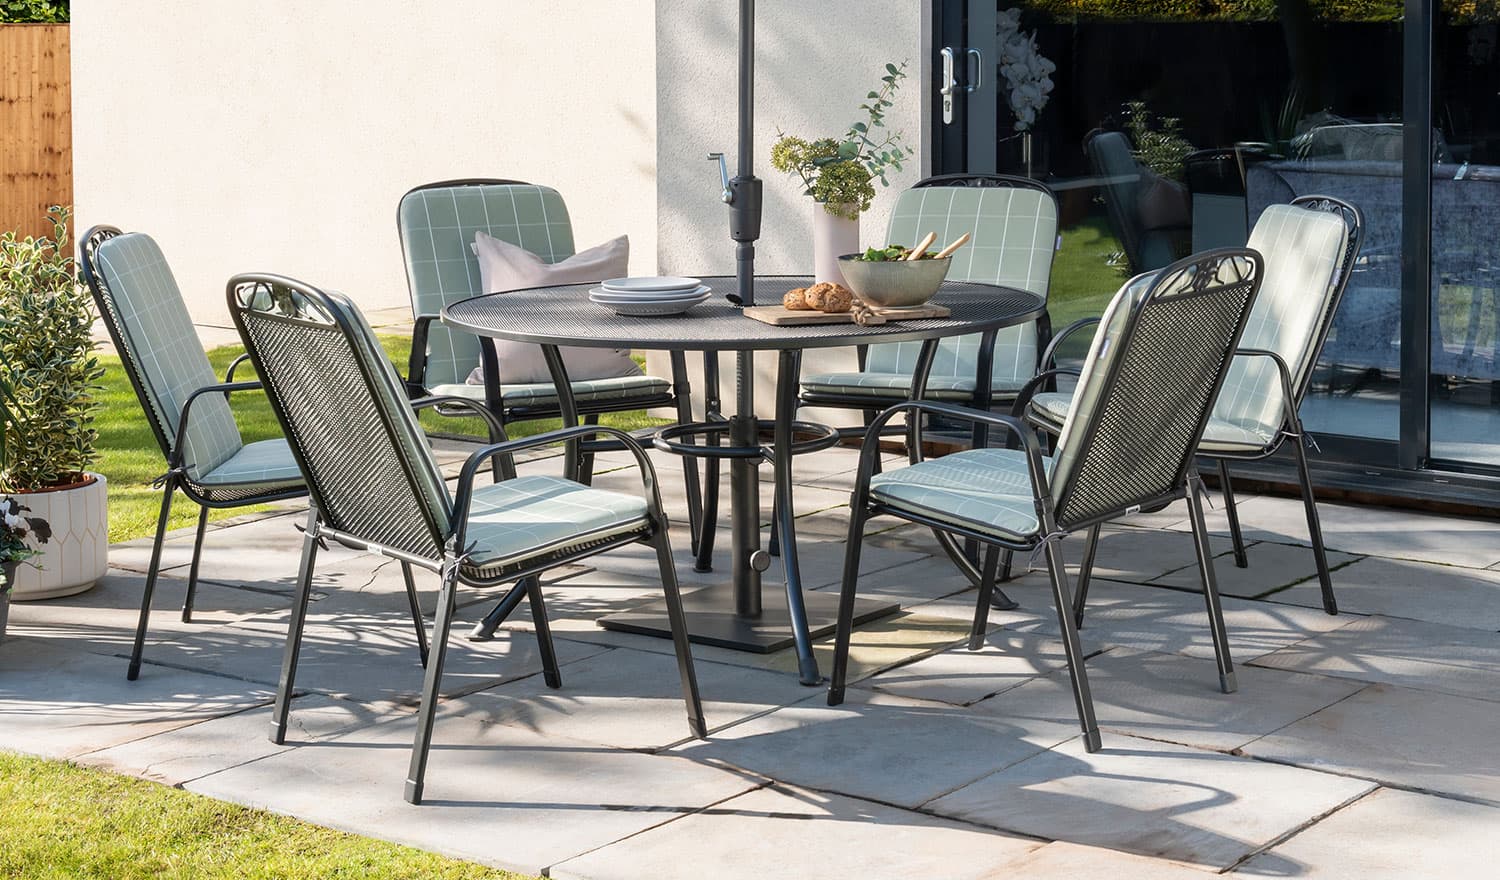 New with matching Chairs KETTLER Kettler Classic Mesh Table Cushions & Parasol. 